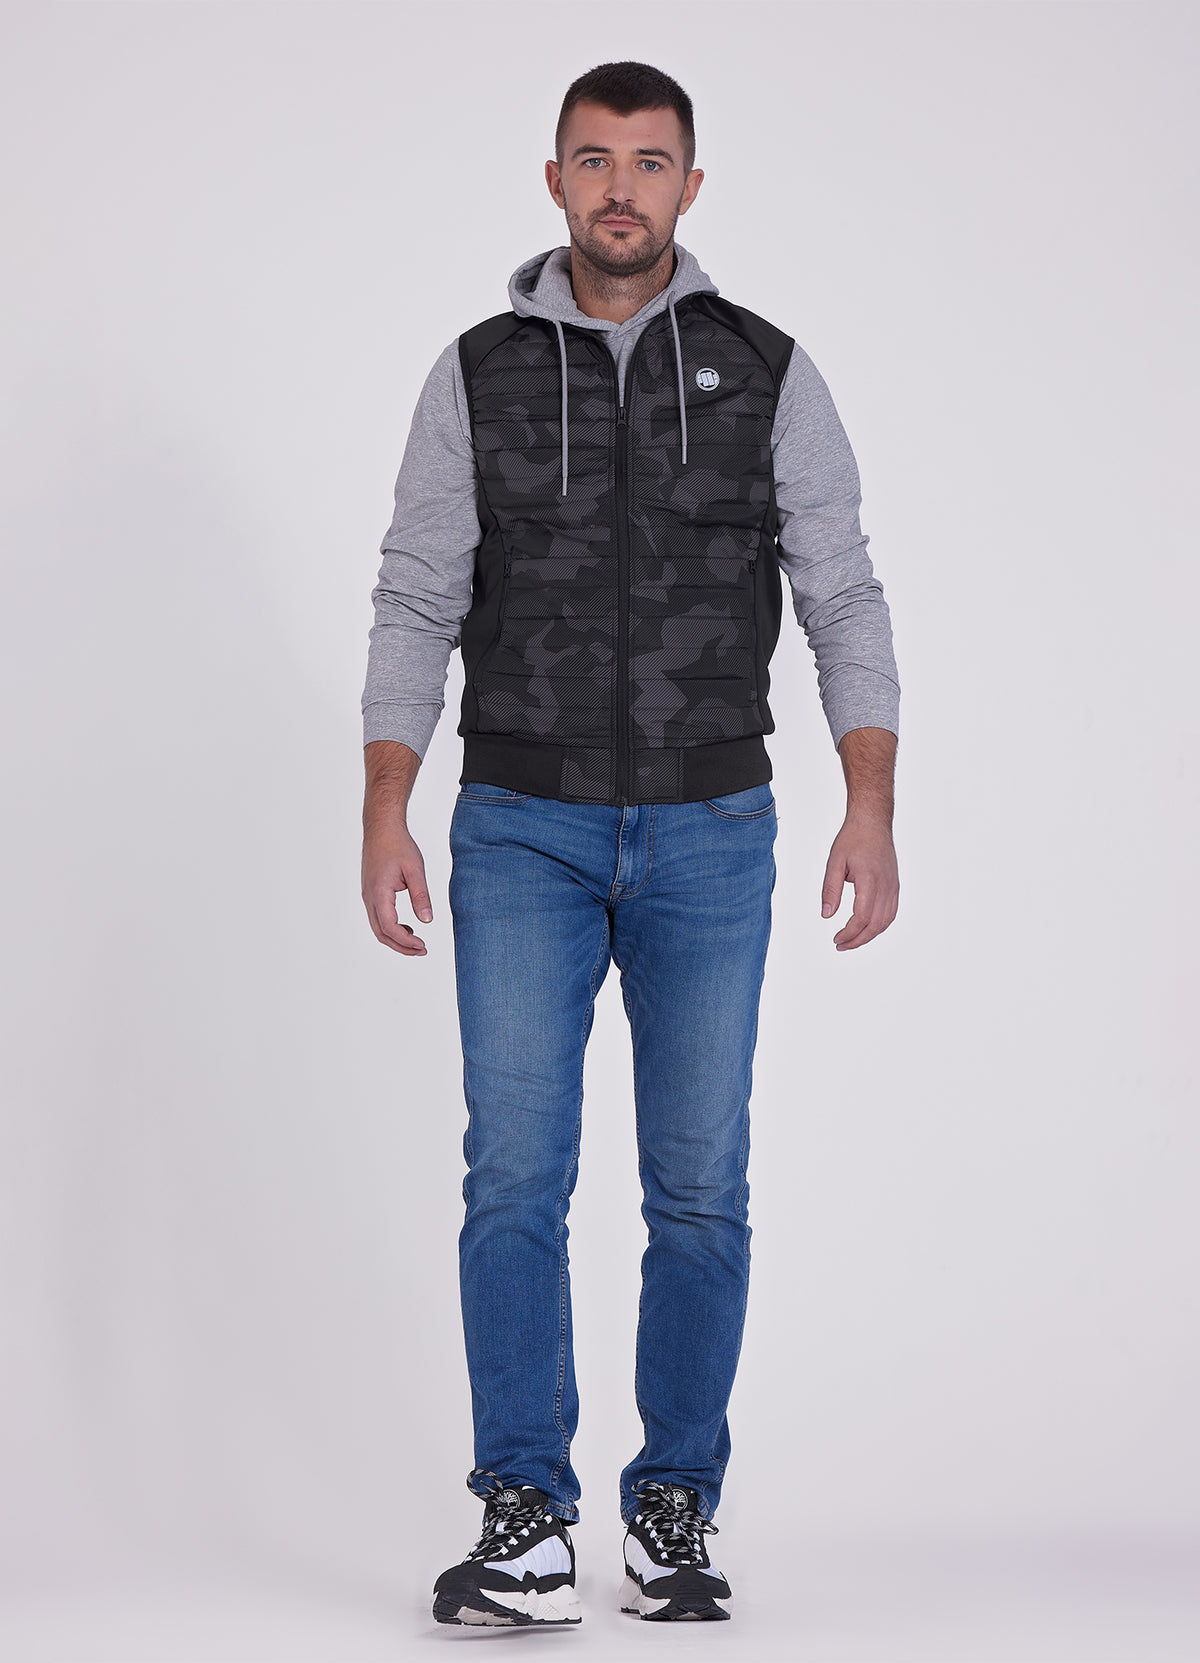 Quilted Vest PACIFIC Black Camo - Pitbull West Coast International Store 